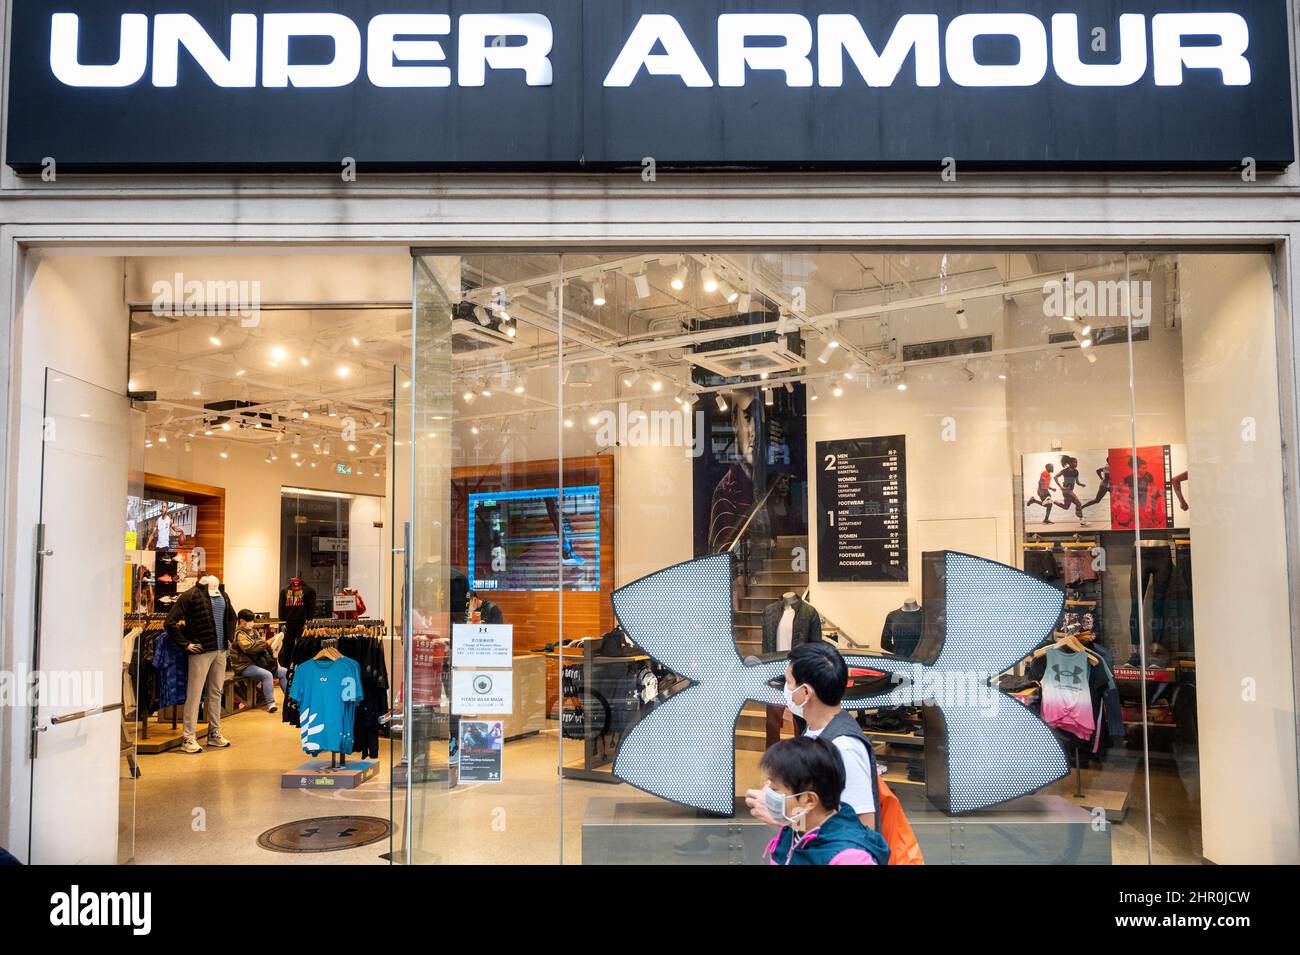 Under Armour Outlet Mall Clearance Deals, 43% OFF | deliciousgreek.ca